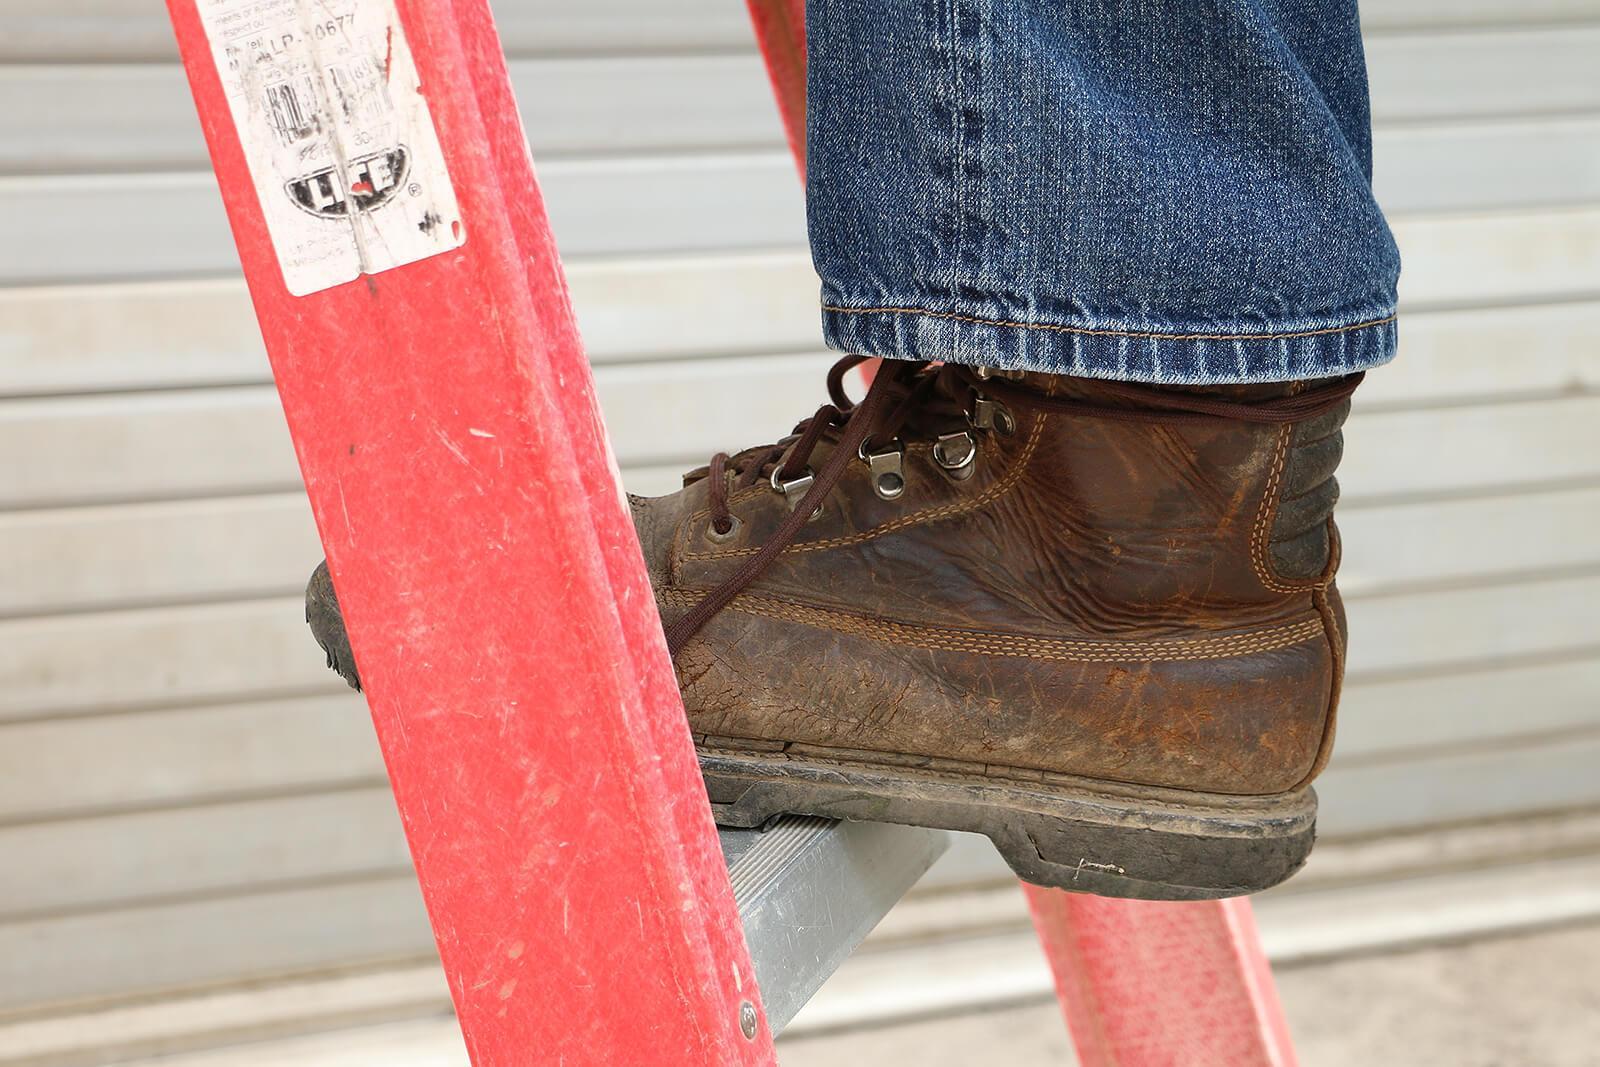 Ladders are frequently a factor in workplace accidents.